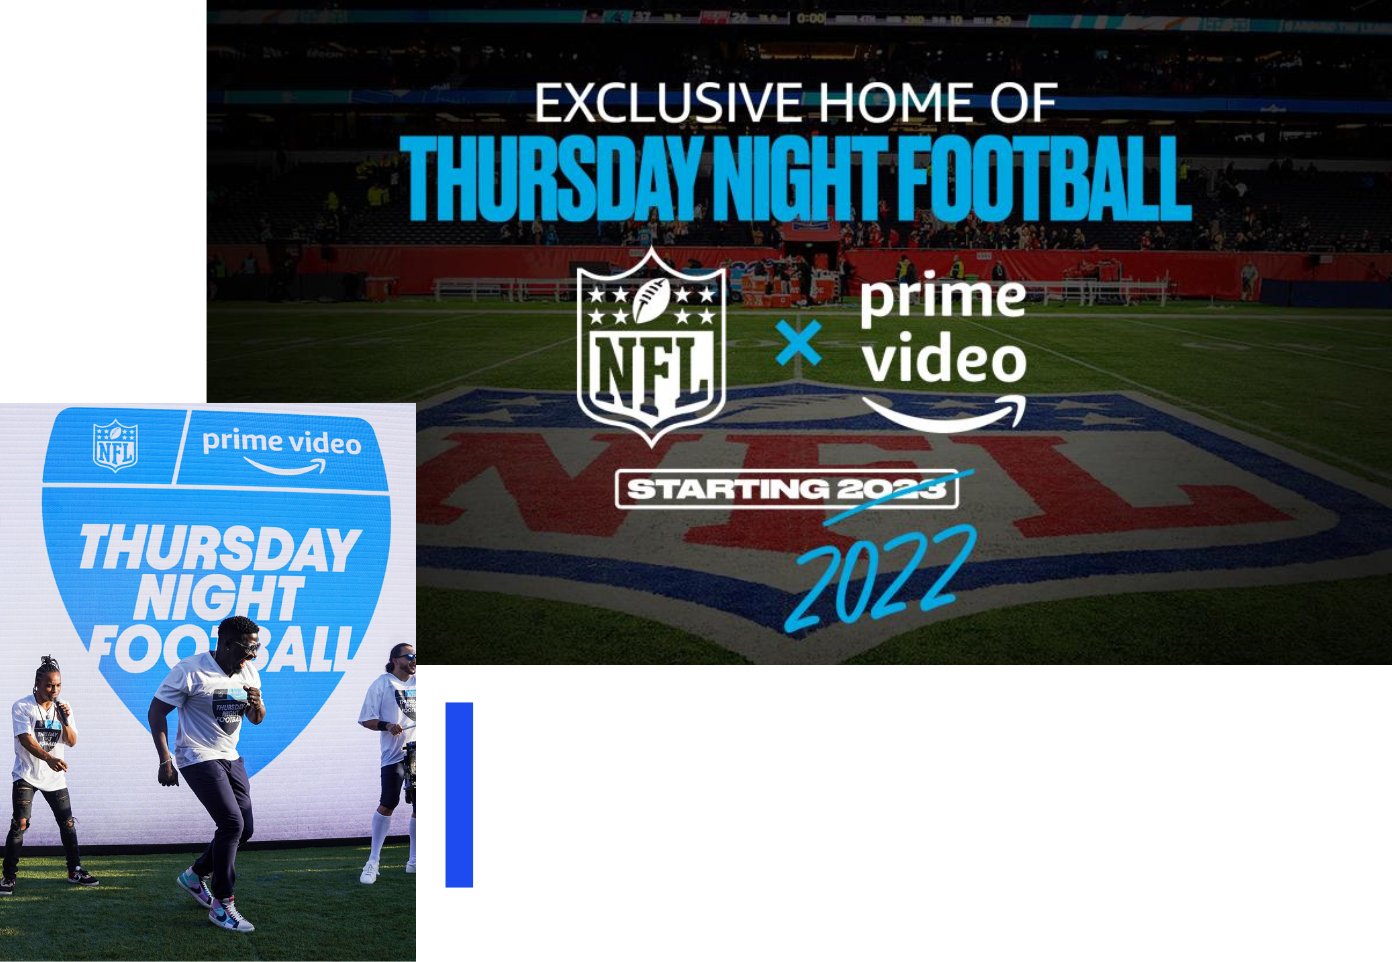 2022 schedule for 'Thursday Night Football' on  Prime Video